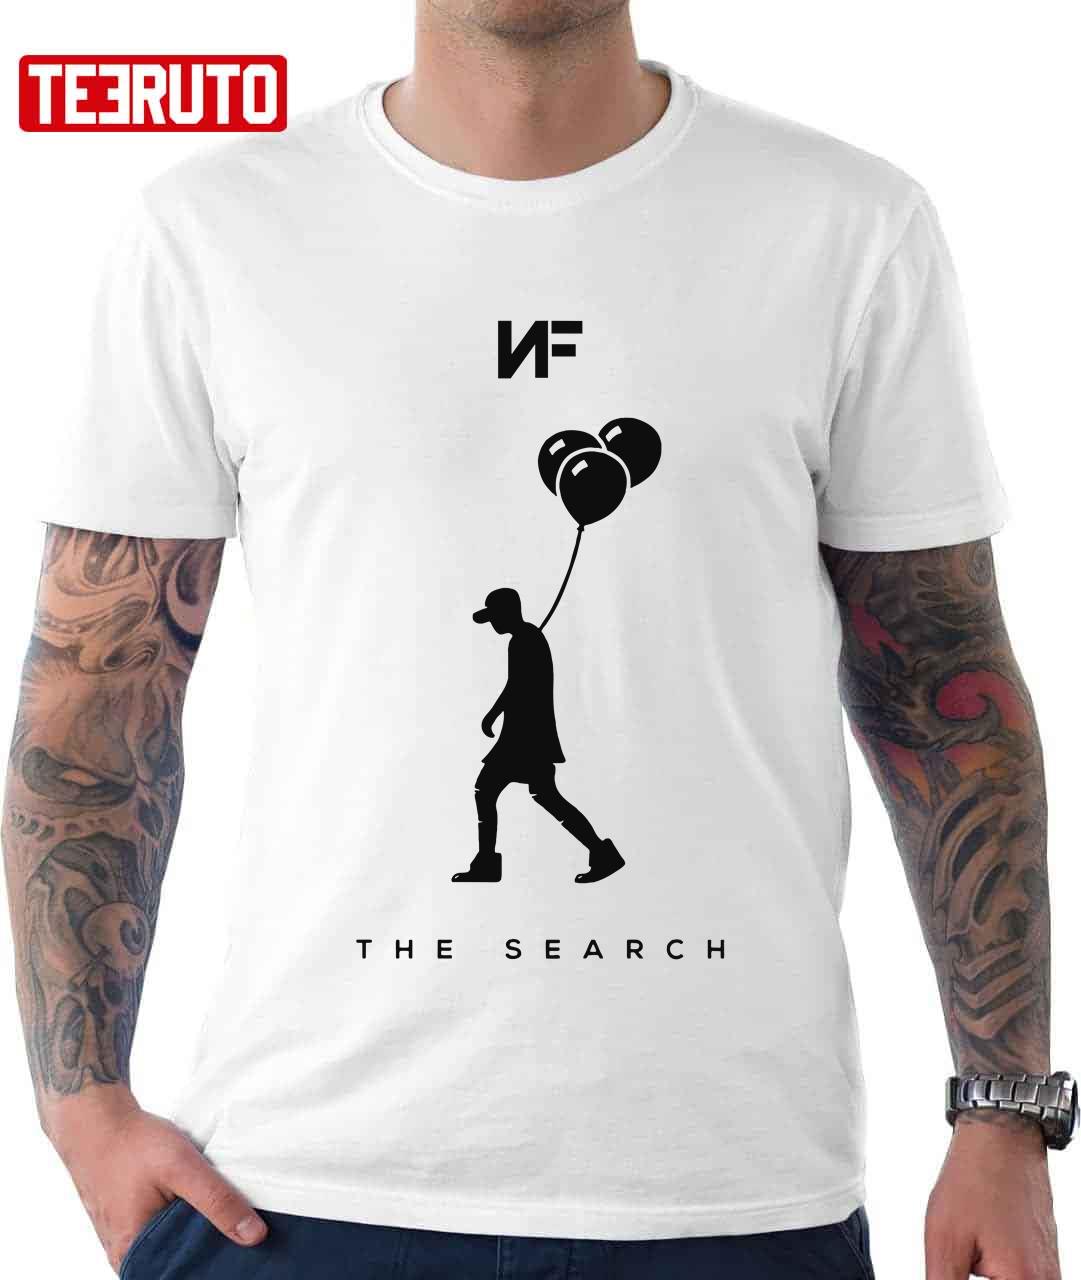 NF Rapper Holding Balloons The Search Unisex T-Shirt